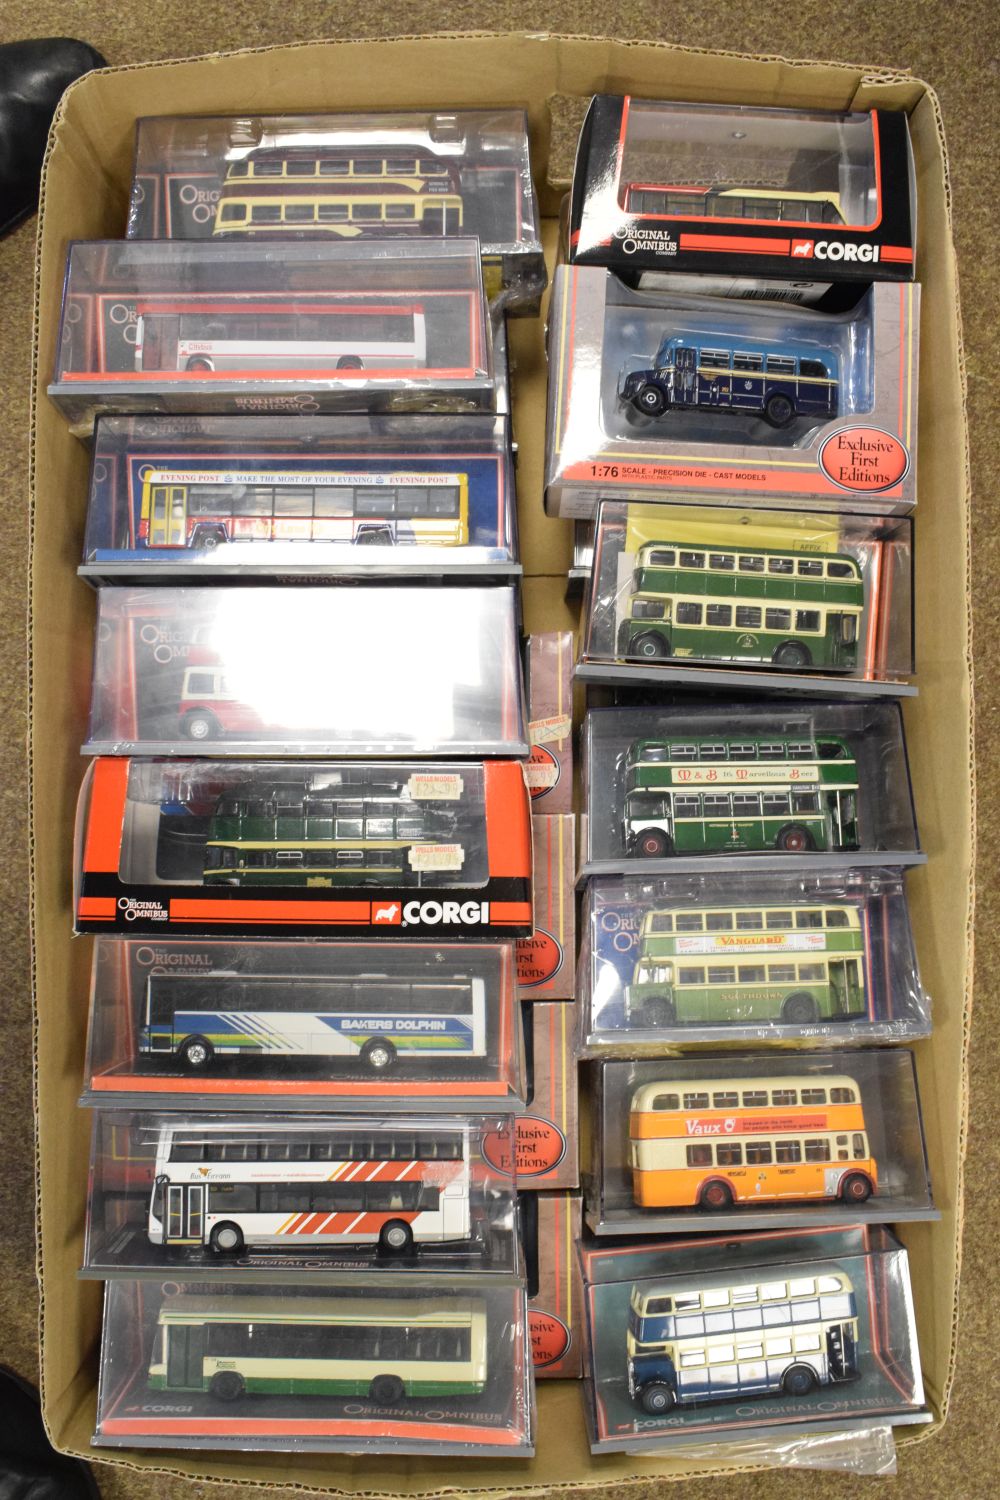 Quantity of Gilbow and Corgi 'The Original Omnibus Company' die-cast model buses and coaches, all - Image 2 of 6